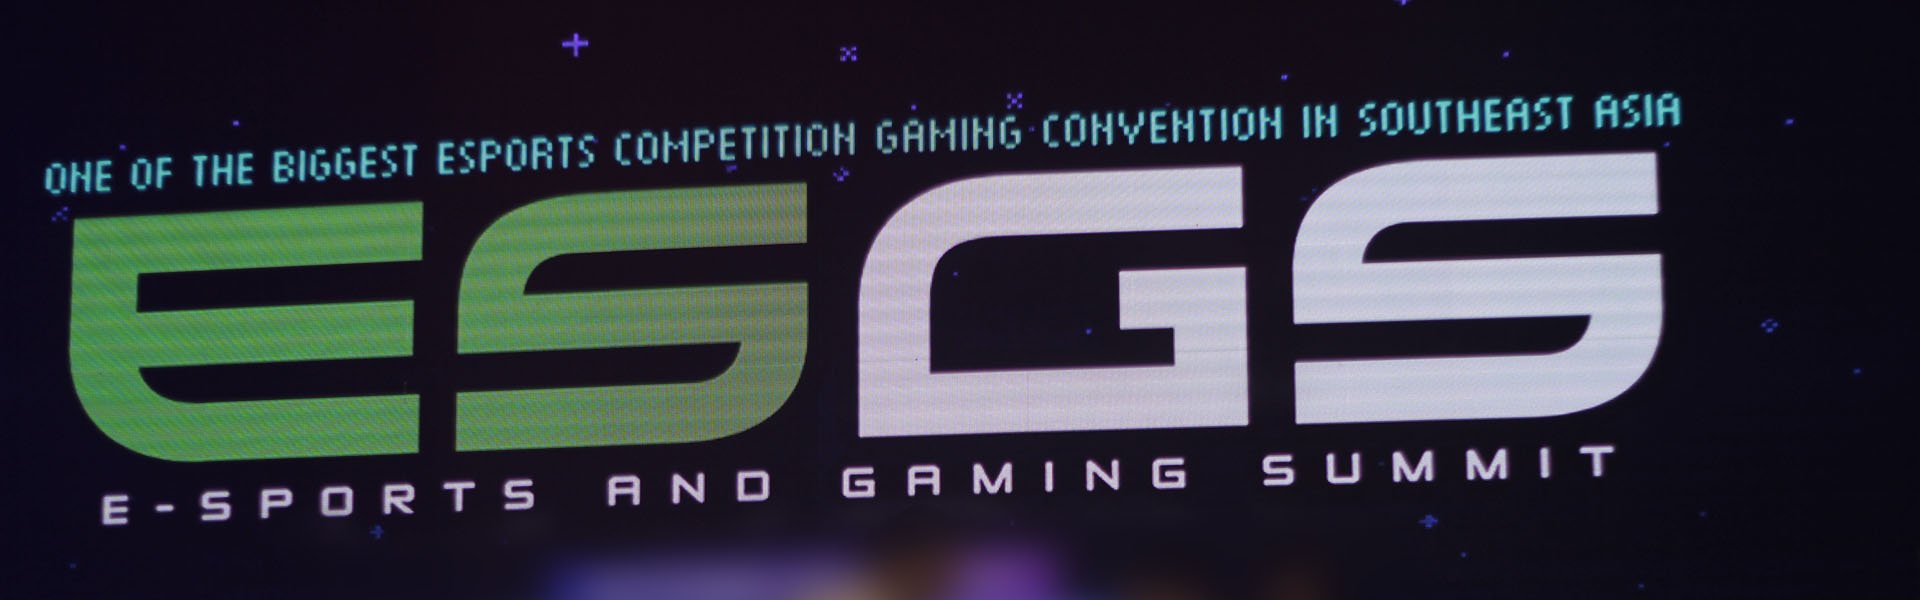 Electronic Sports and Gaming Summit - ESGS 2017 Recap 9